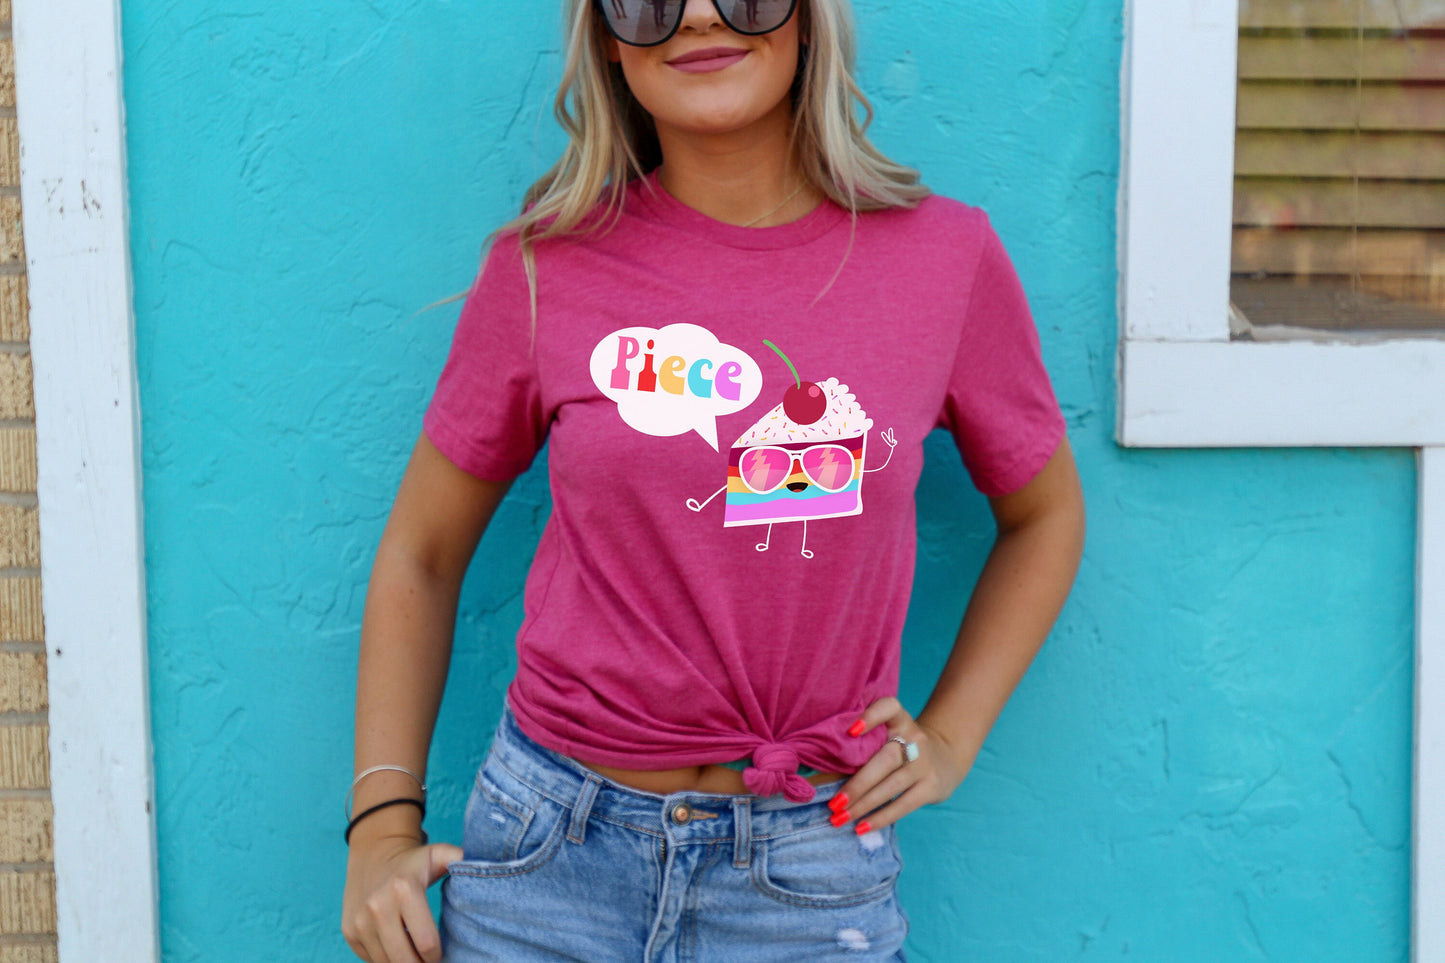 Piece of Cake Peace Loving Adorable Baking Ultra Soft Graphic Tee Unisex Soft Tee T-shirt for Women or Men